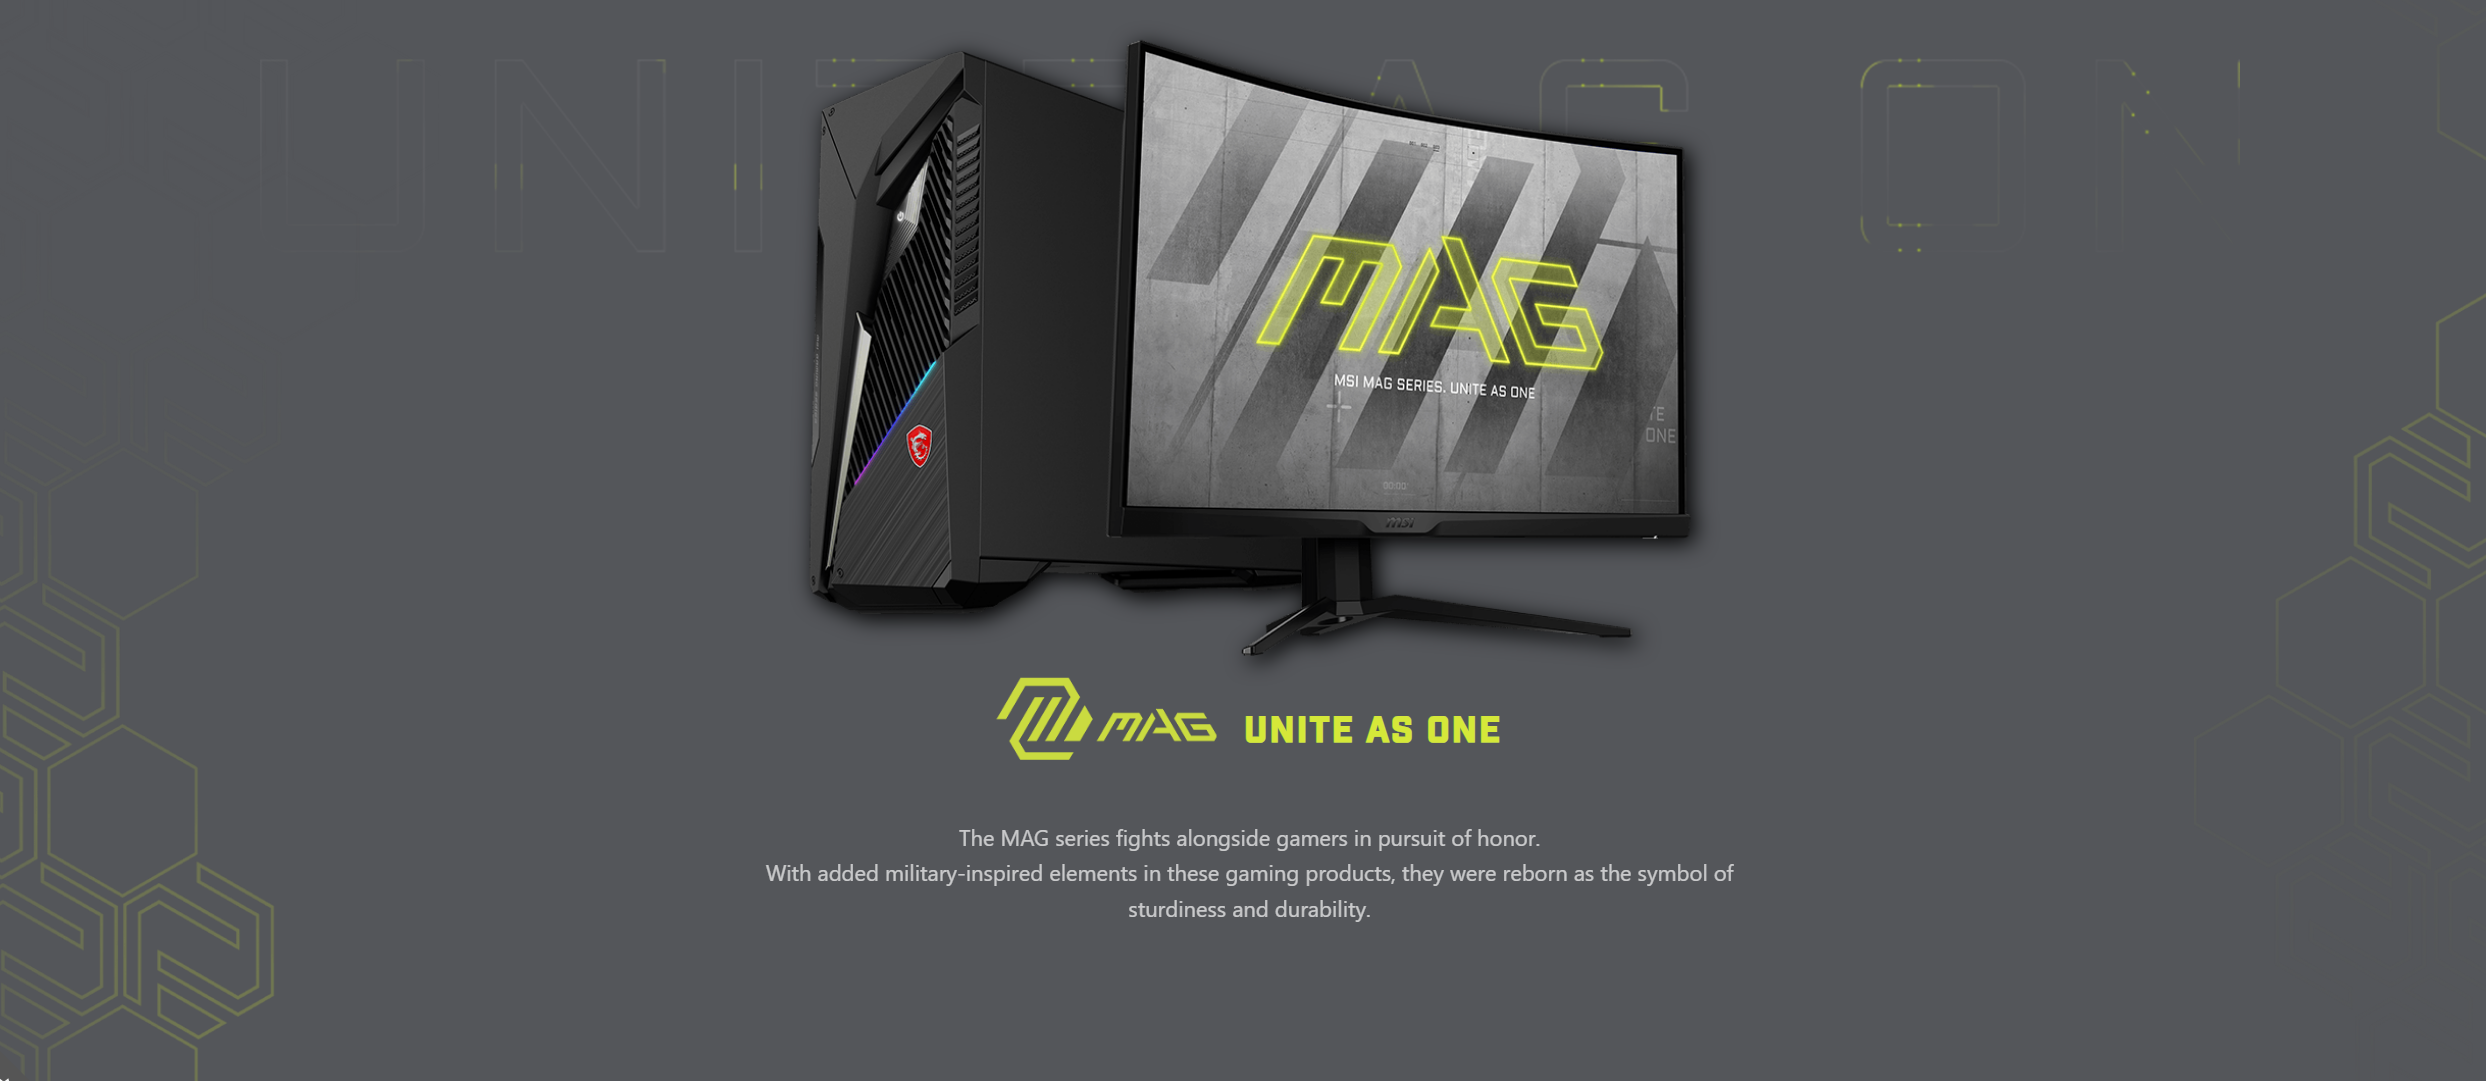 A large marketing image providing additional information about the product MSI MAG 325CQRXF 31.5" Curved UWQHD 240Hz VA Monitor - Additional alt info not provided